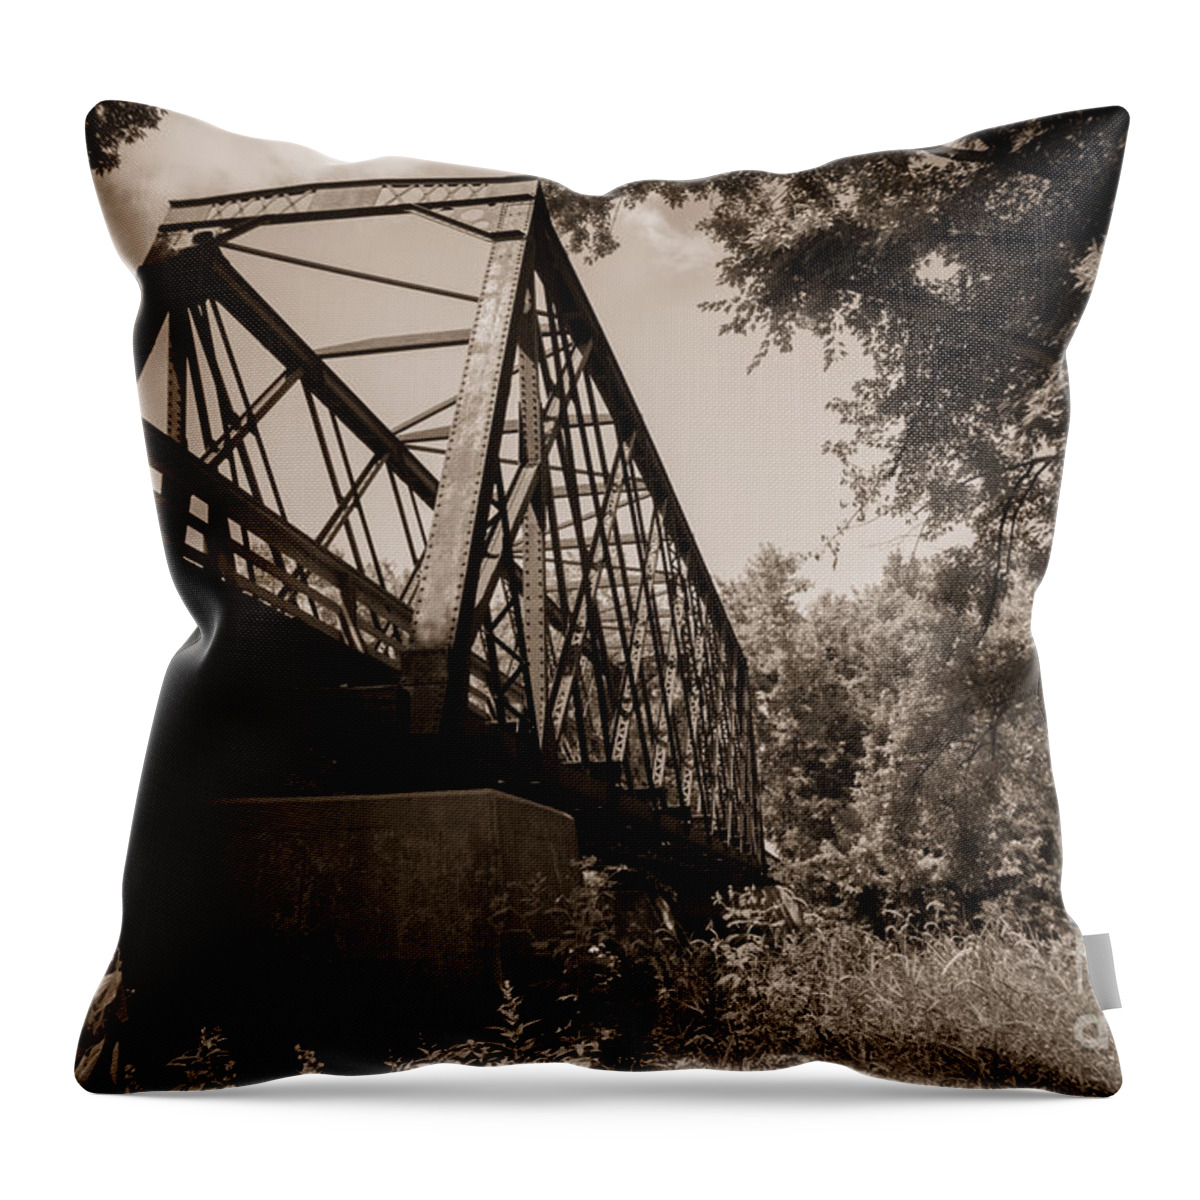 Trestle Throw Pillow featuring the photograph Old Rail Bridge by M Dale